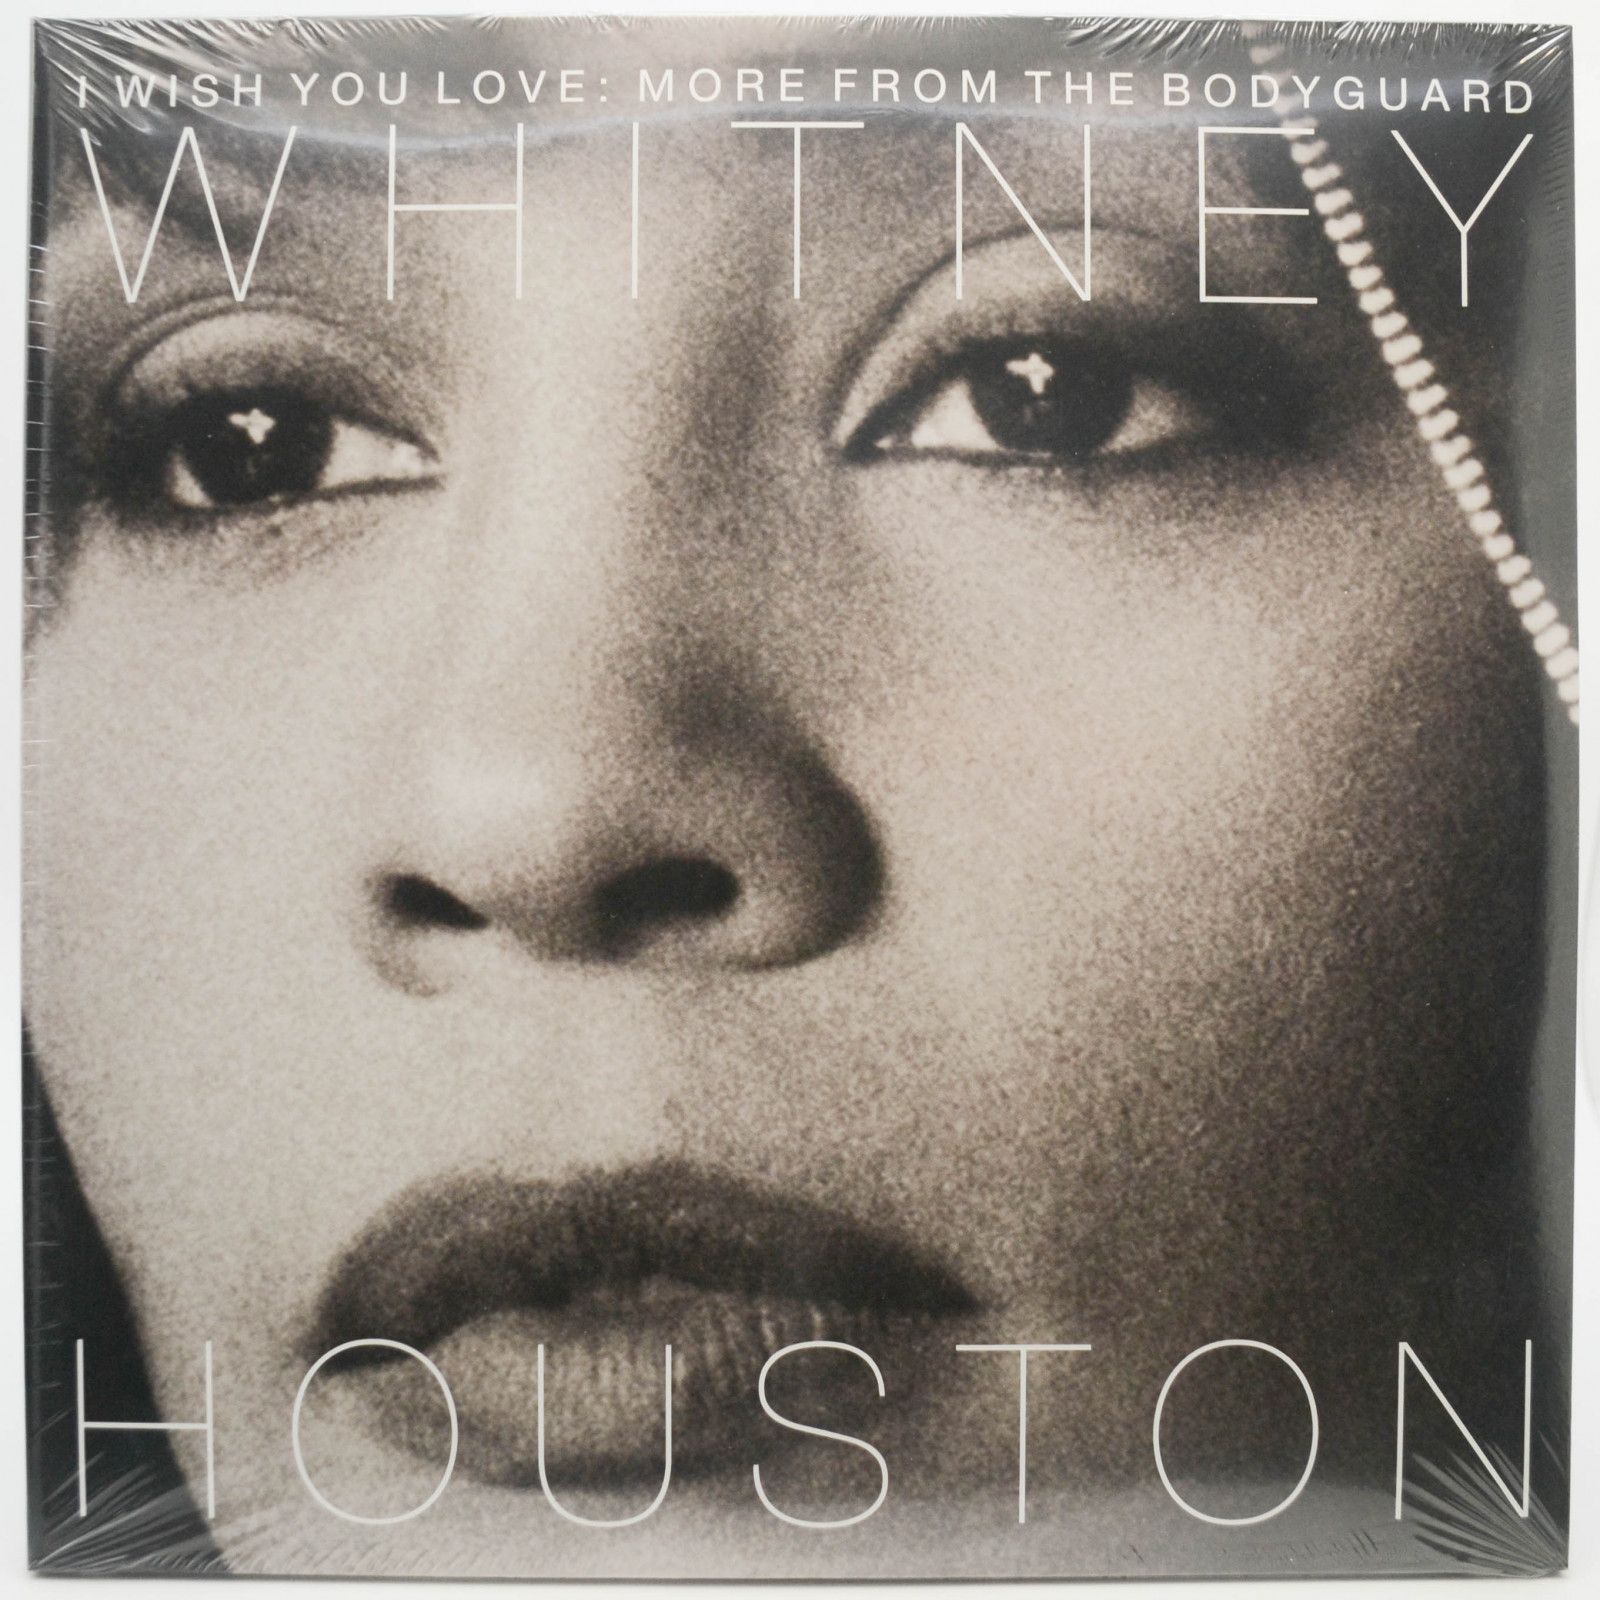 Whitney Houston — I Wish You Love: More From The Bodyguard (2LP), 2017